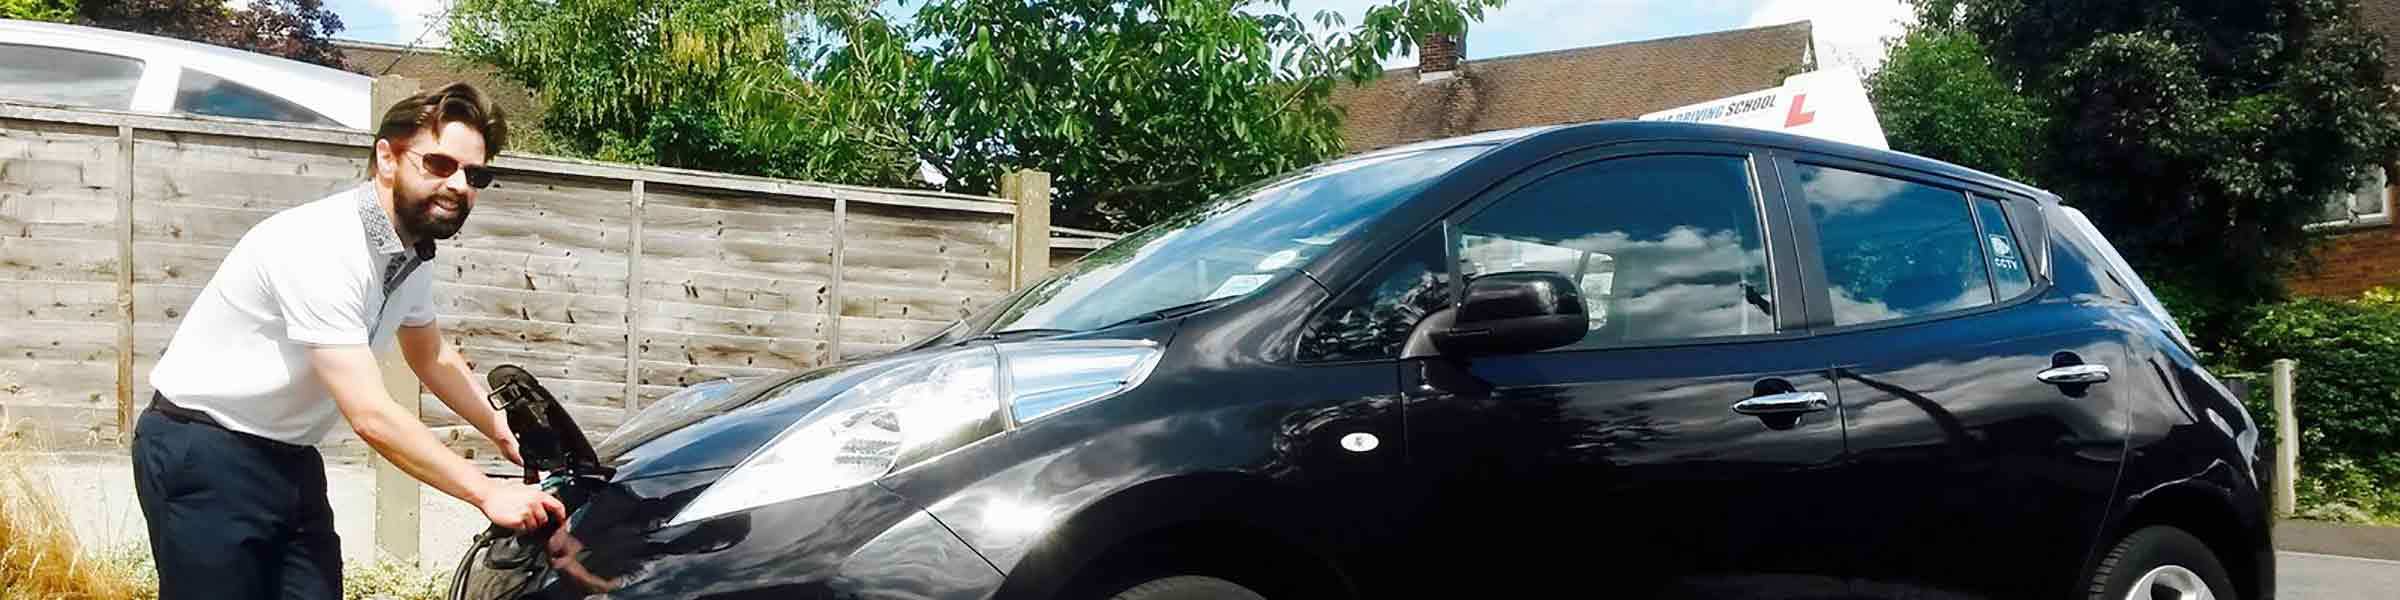 Electric Vehicle Driving Instructor Rob Cooling | Q&A